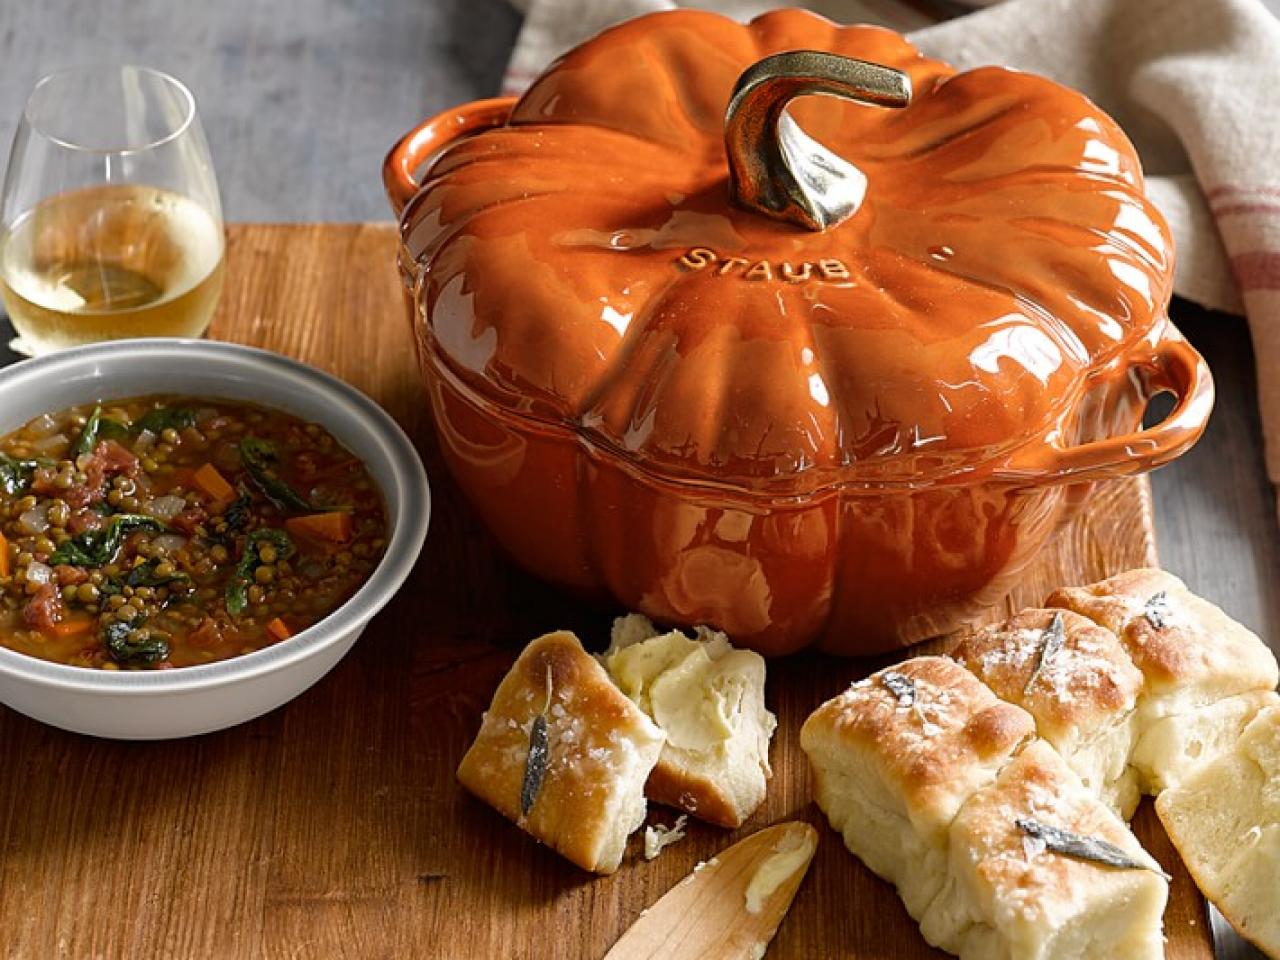 The Pioneer Woman Has Released A Pumpkin Dutch Oven For